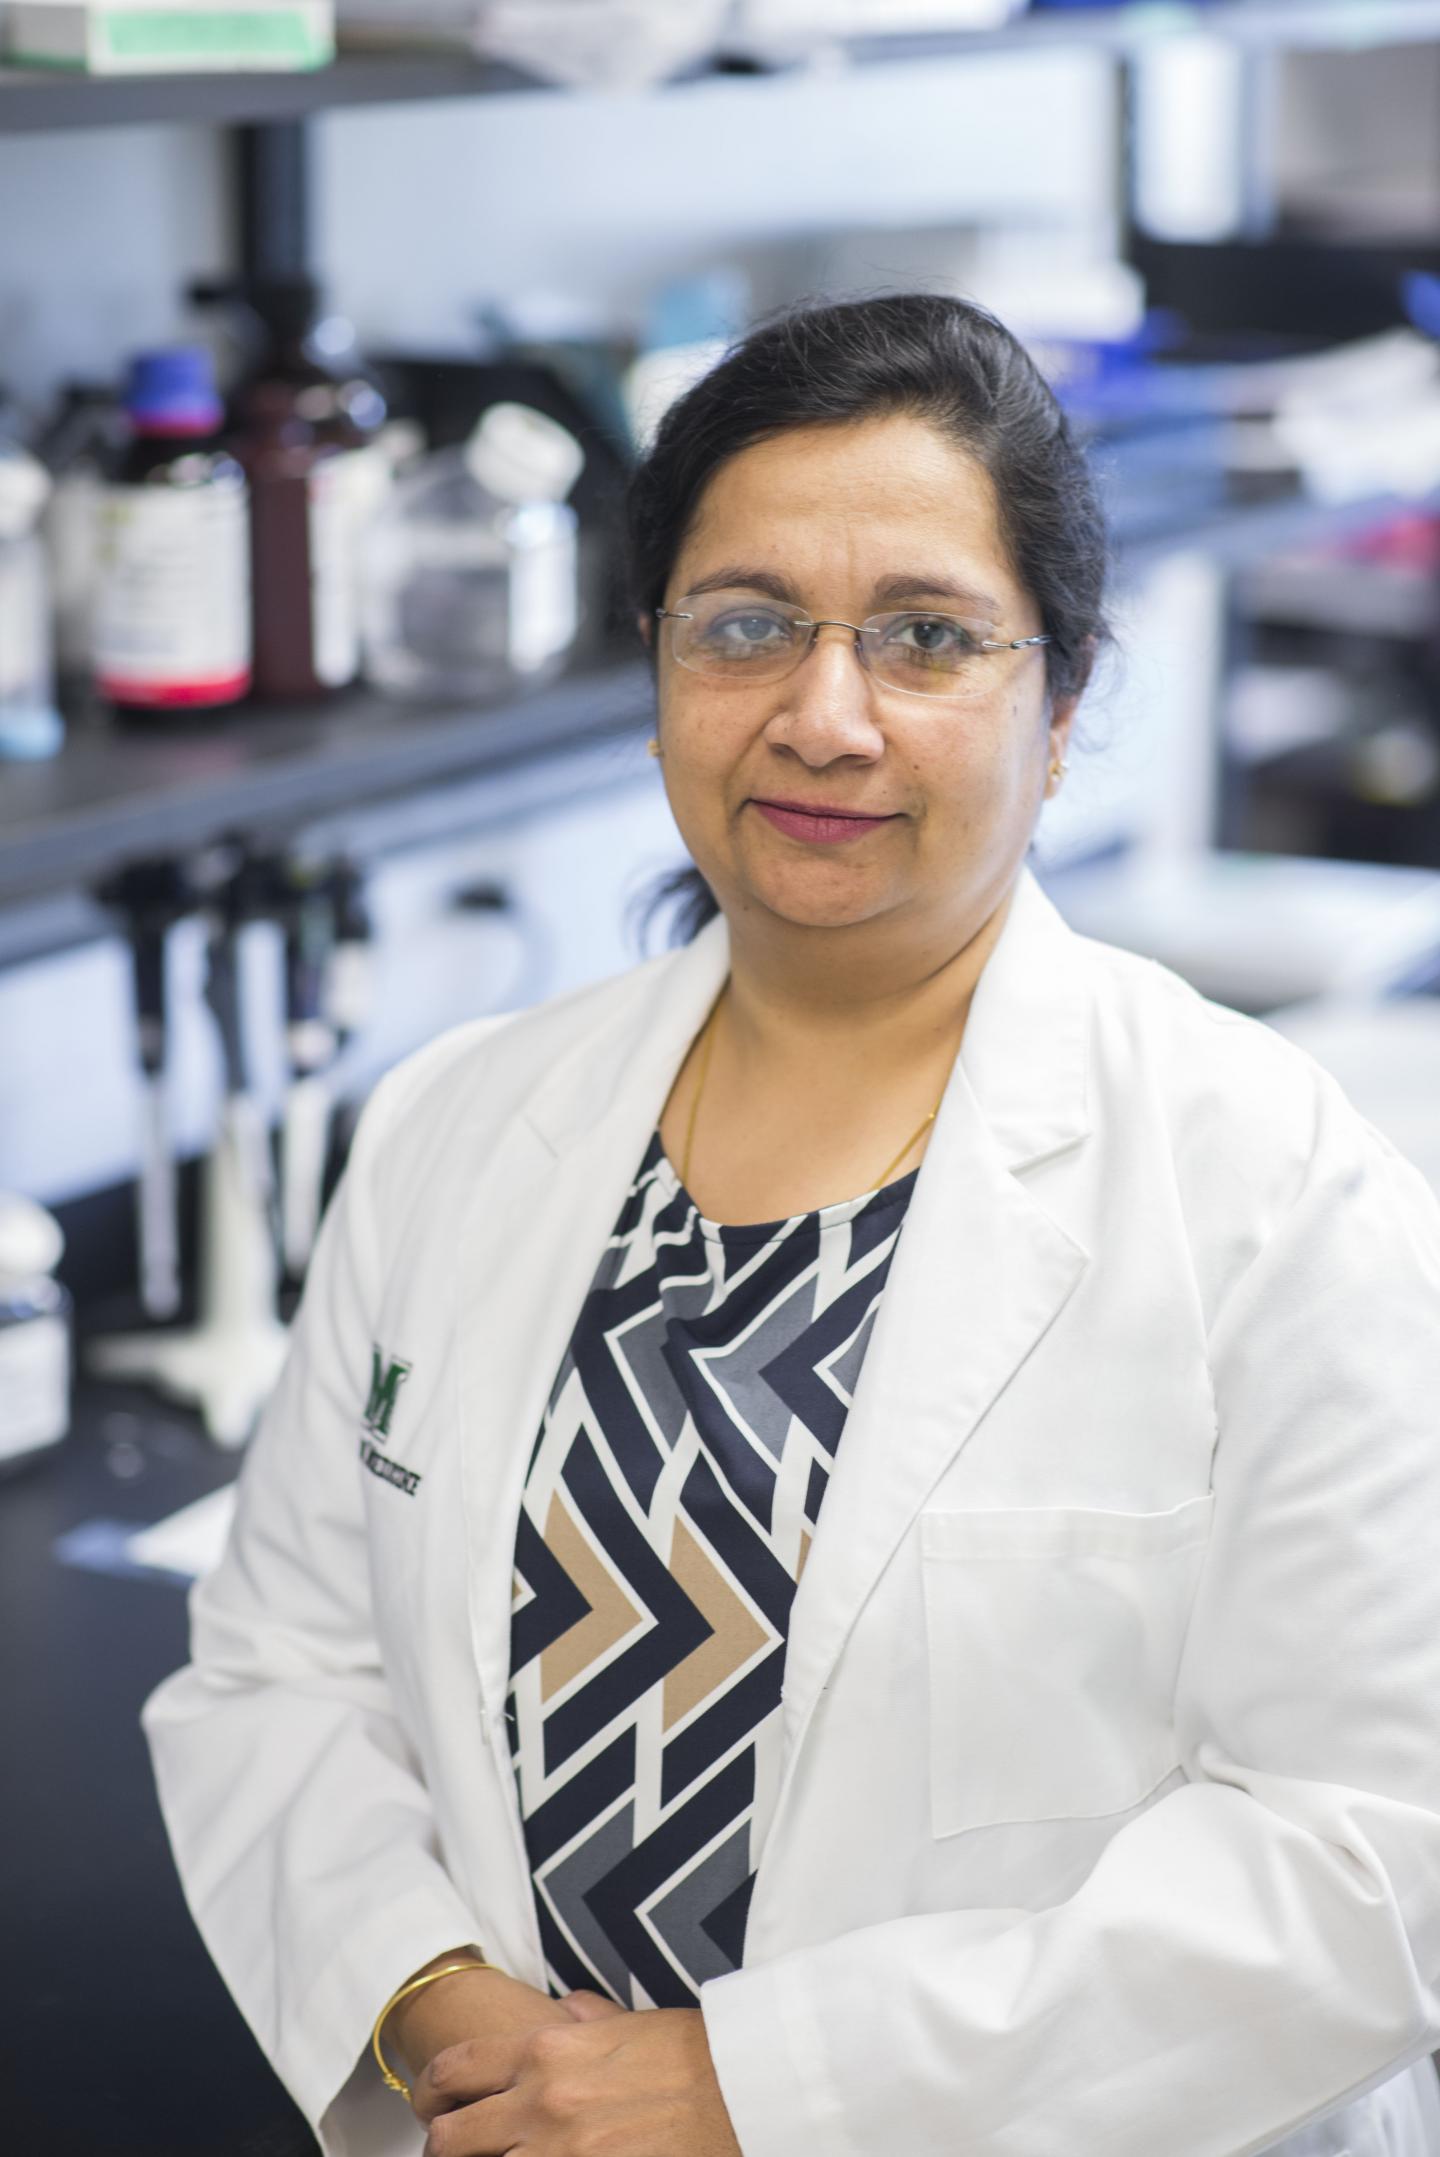 Marshall University Researchers Advance Findings that Reduce Metabolic Syndrome